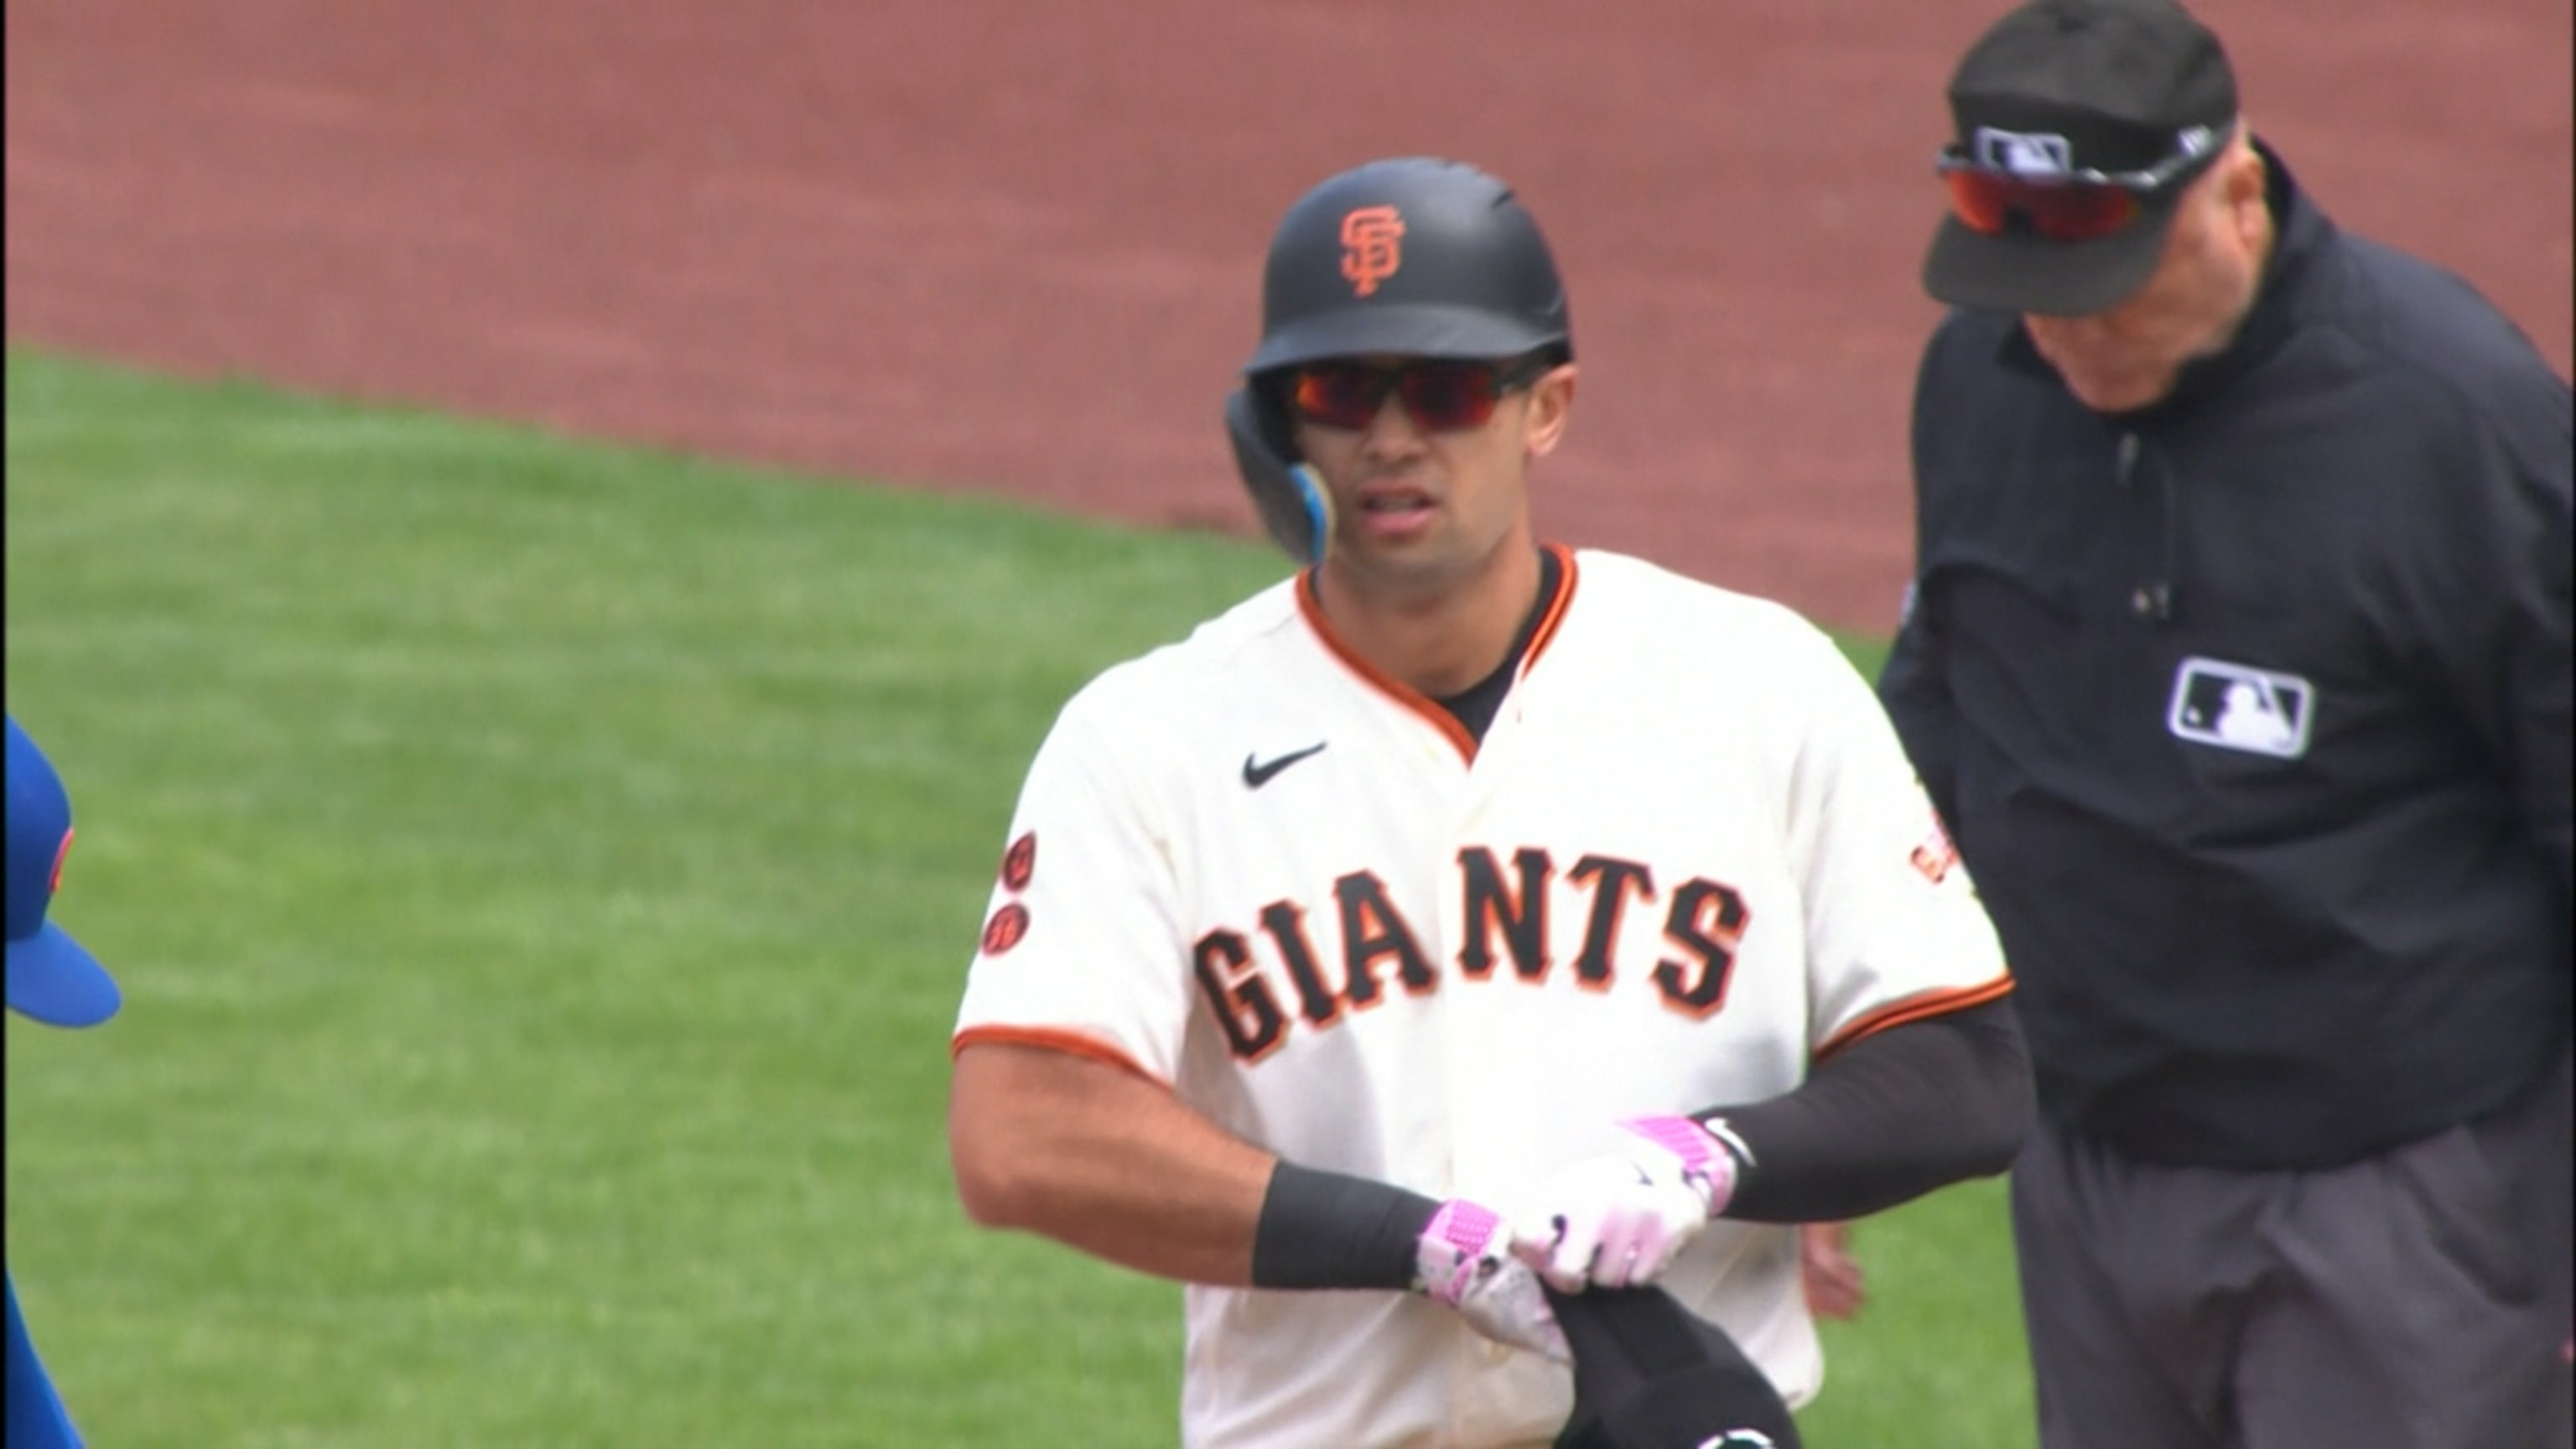 Pederson, Estrada homer, SS Crawford pitches as Giants rout Cubs 13-3